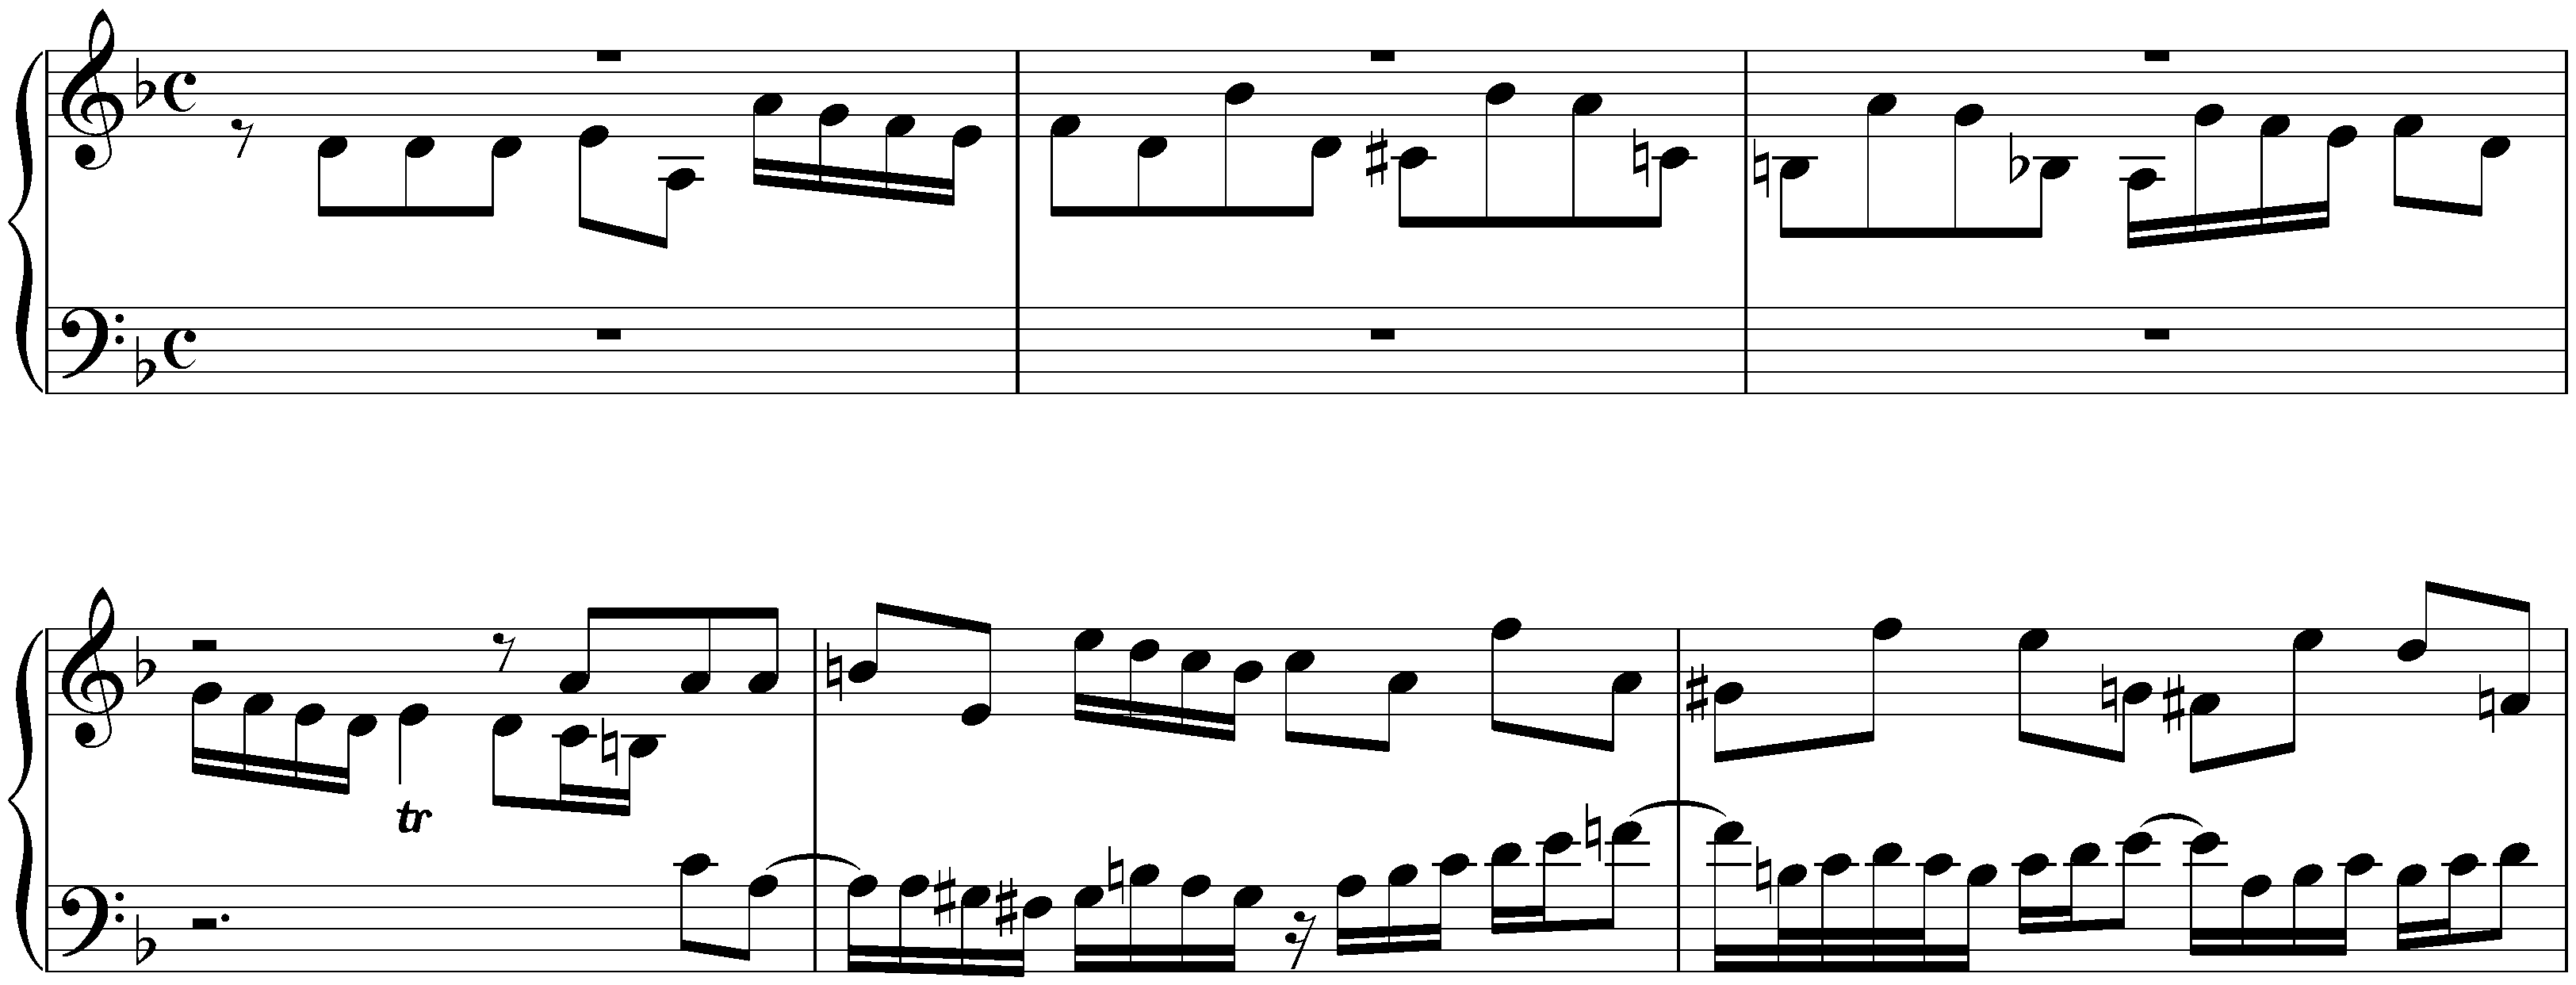 Fugue in D minor, BWV Anh. 180